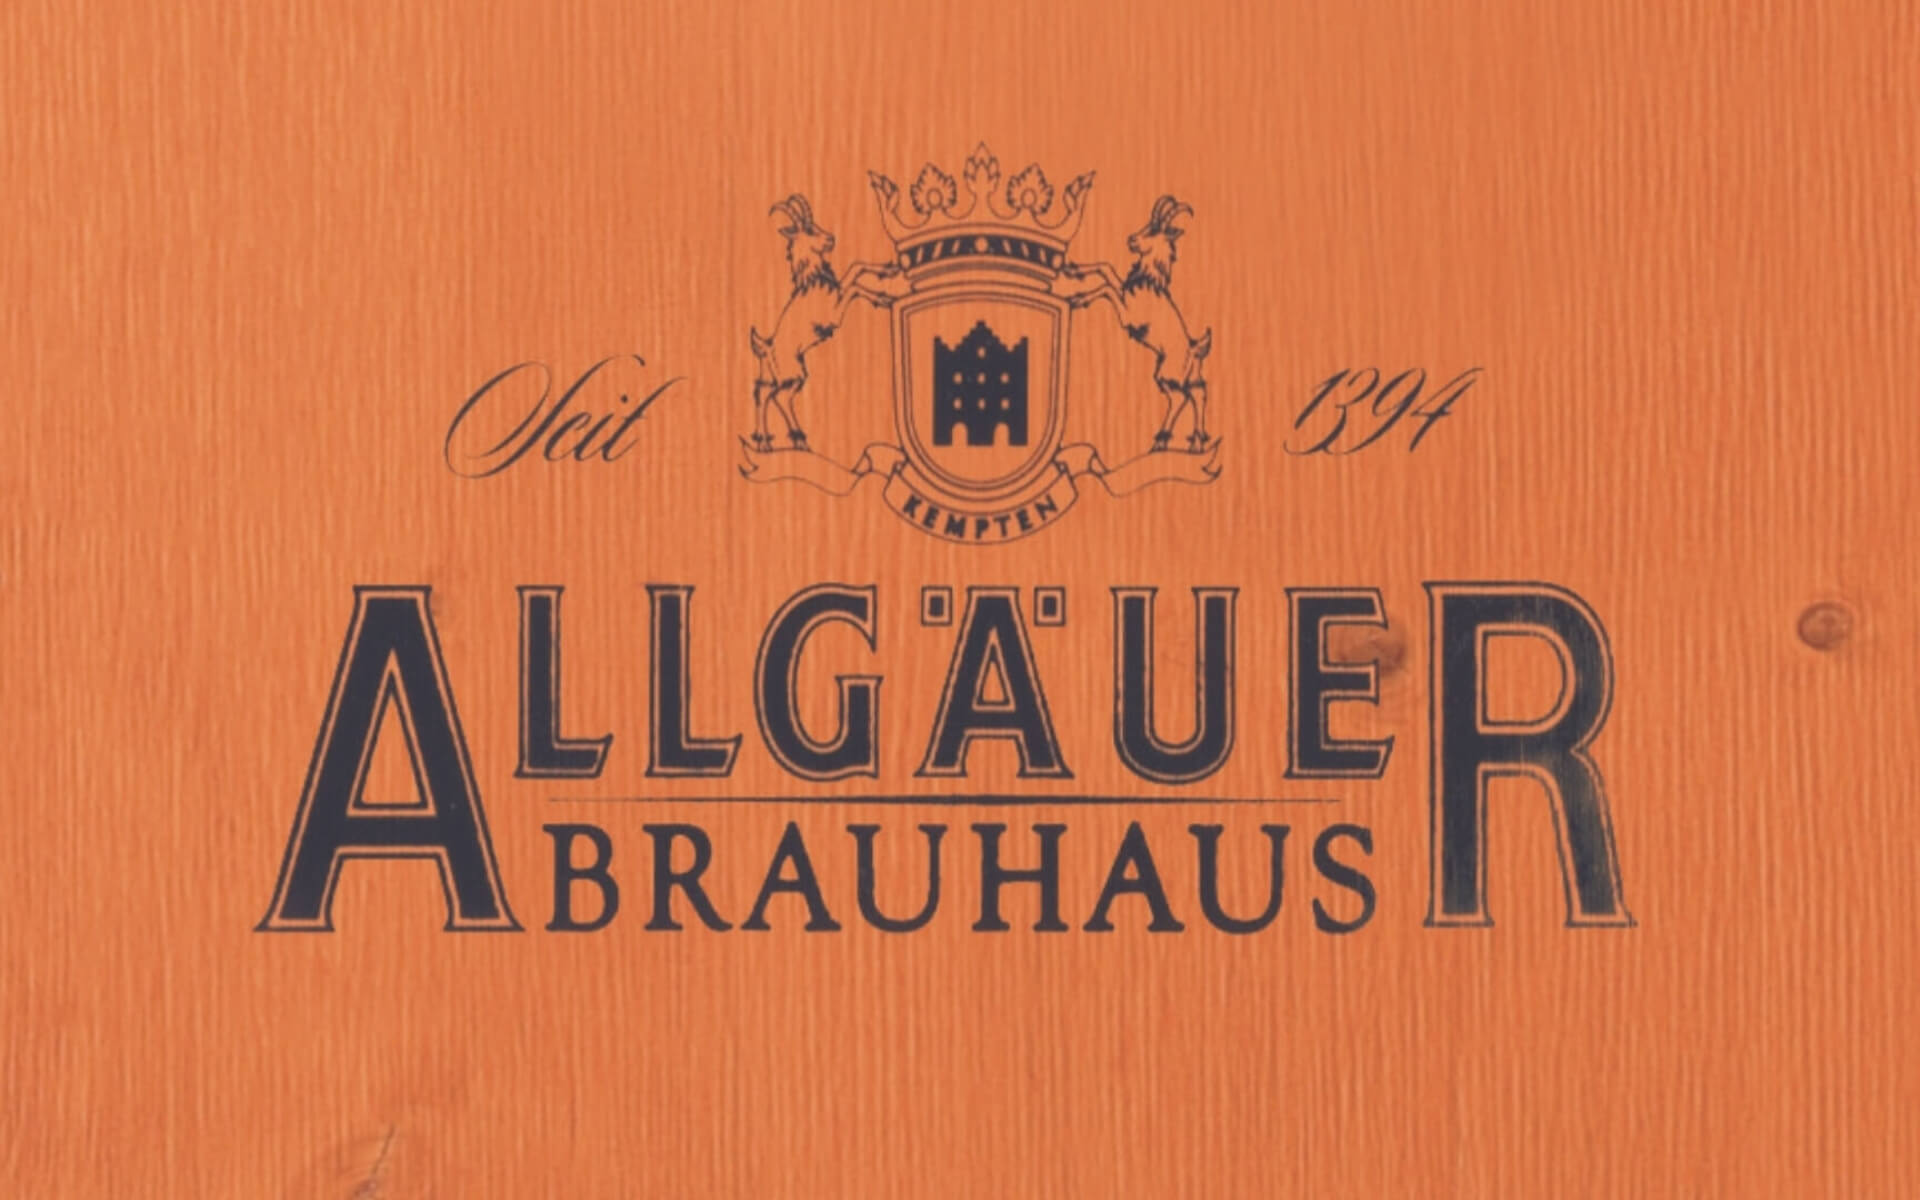 The advertising logo of the "Allgäuer Brauhaus" was screen-printed on the top of the beer garden table set by RUKU1952.